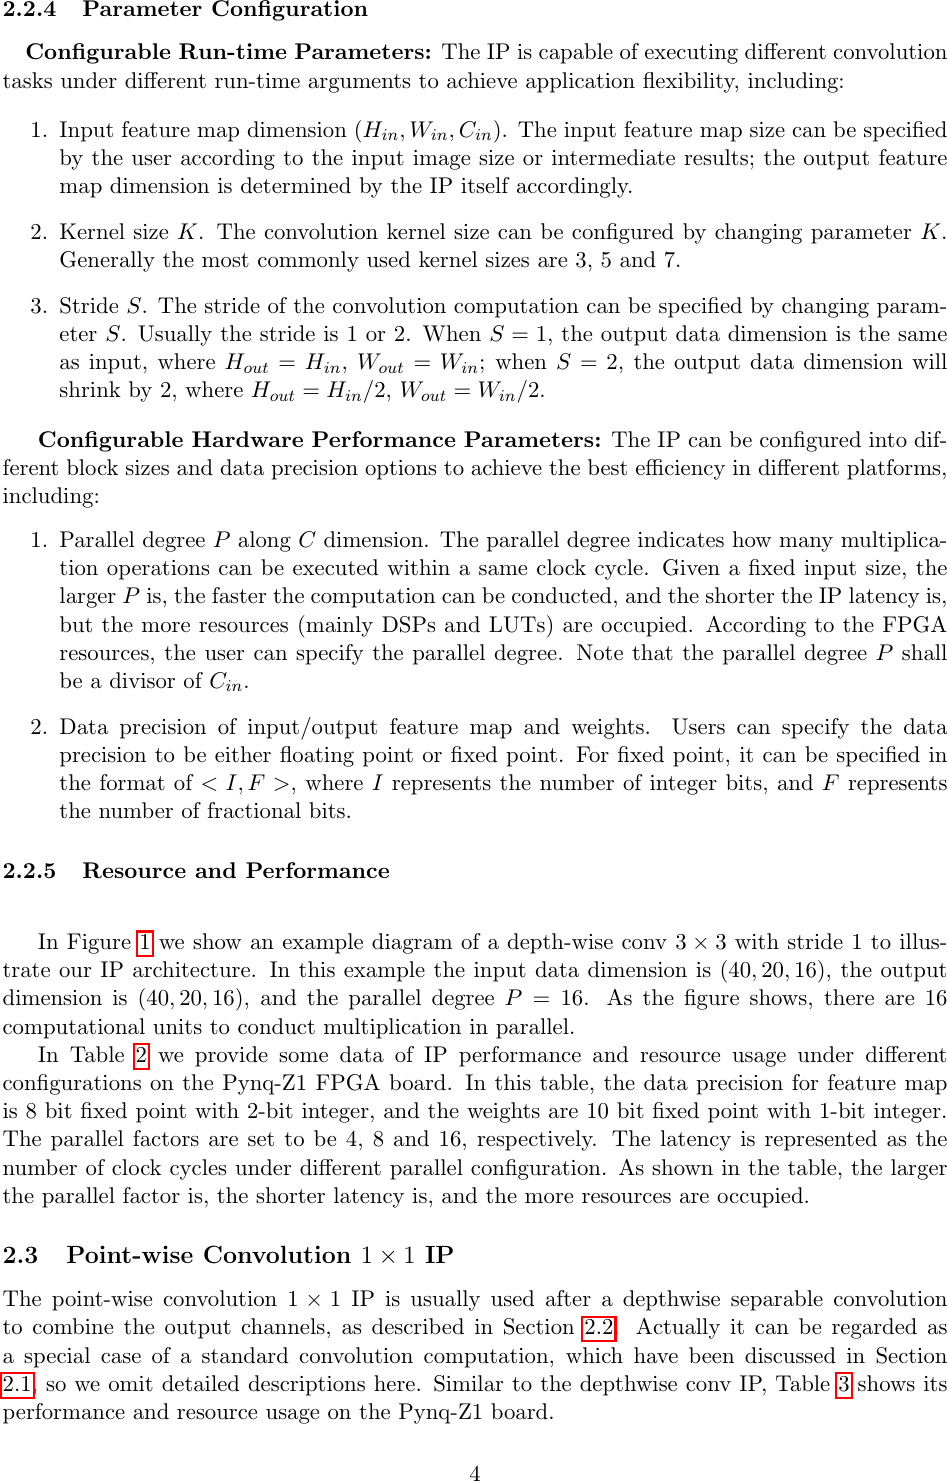 Page 4 of 10 - Open Source IP Manual